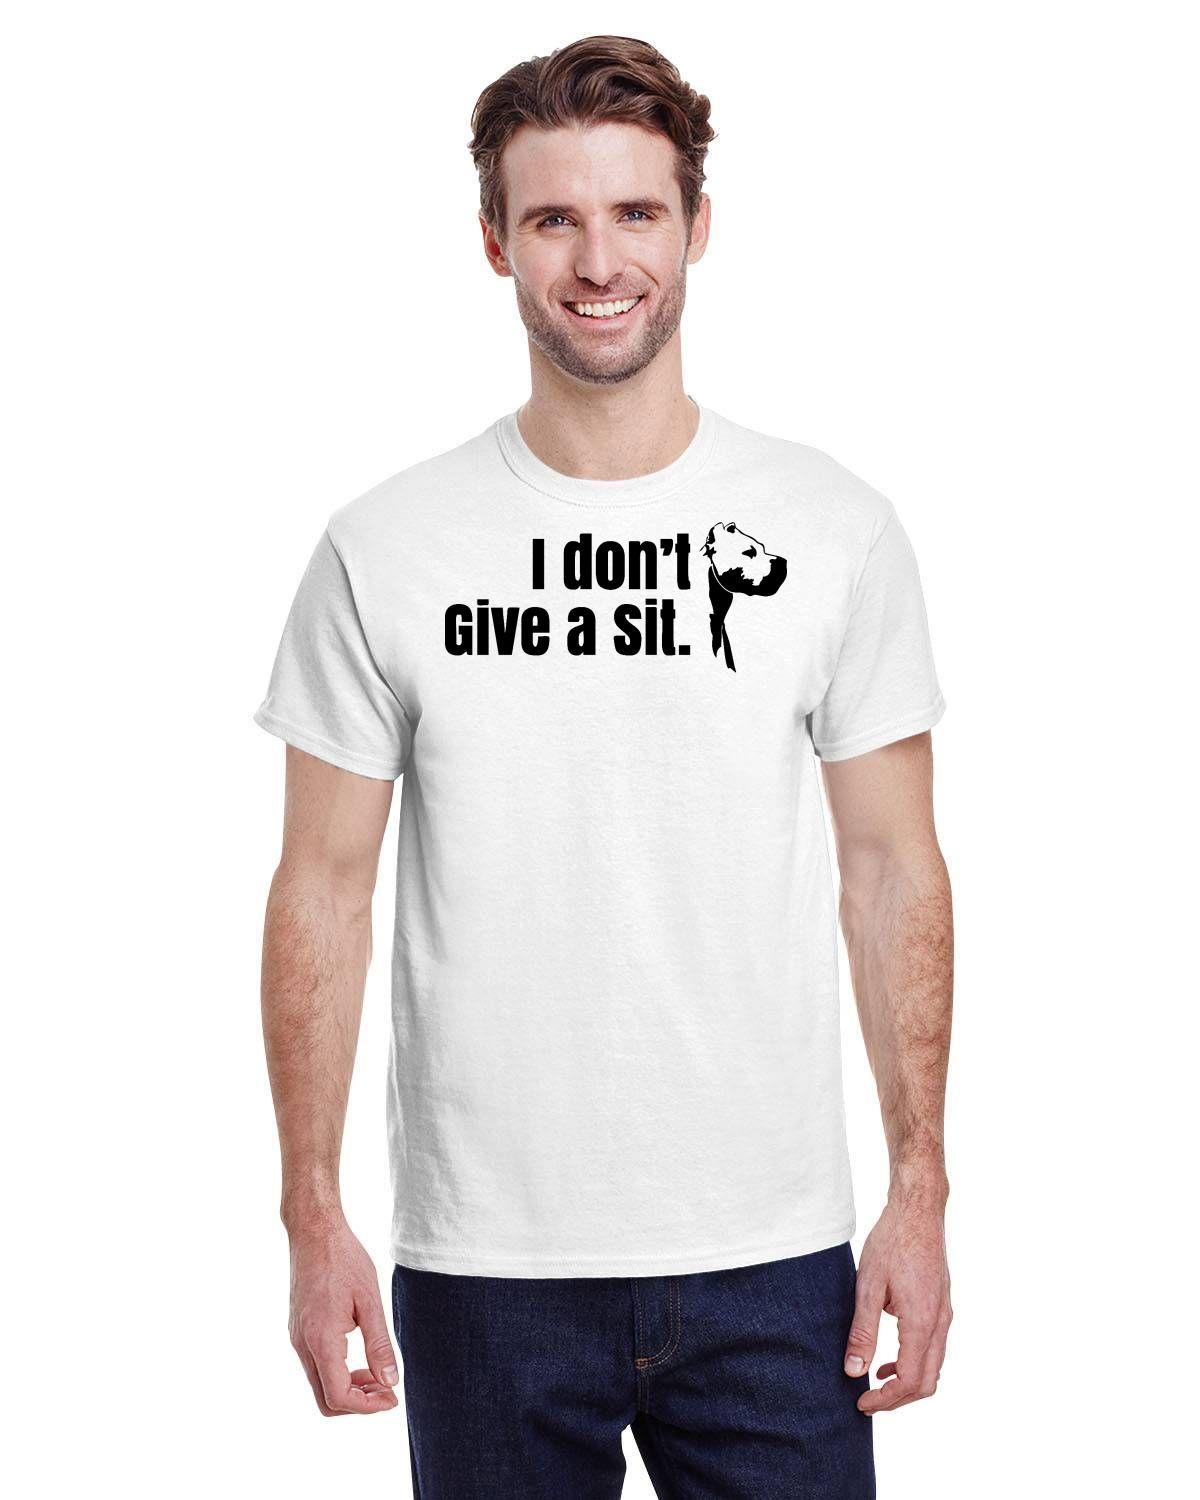 CDAC "I Don't Give A Sit" White Adult t-shirt